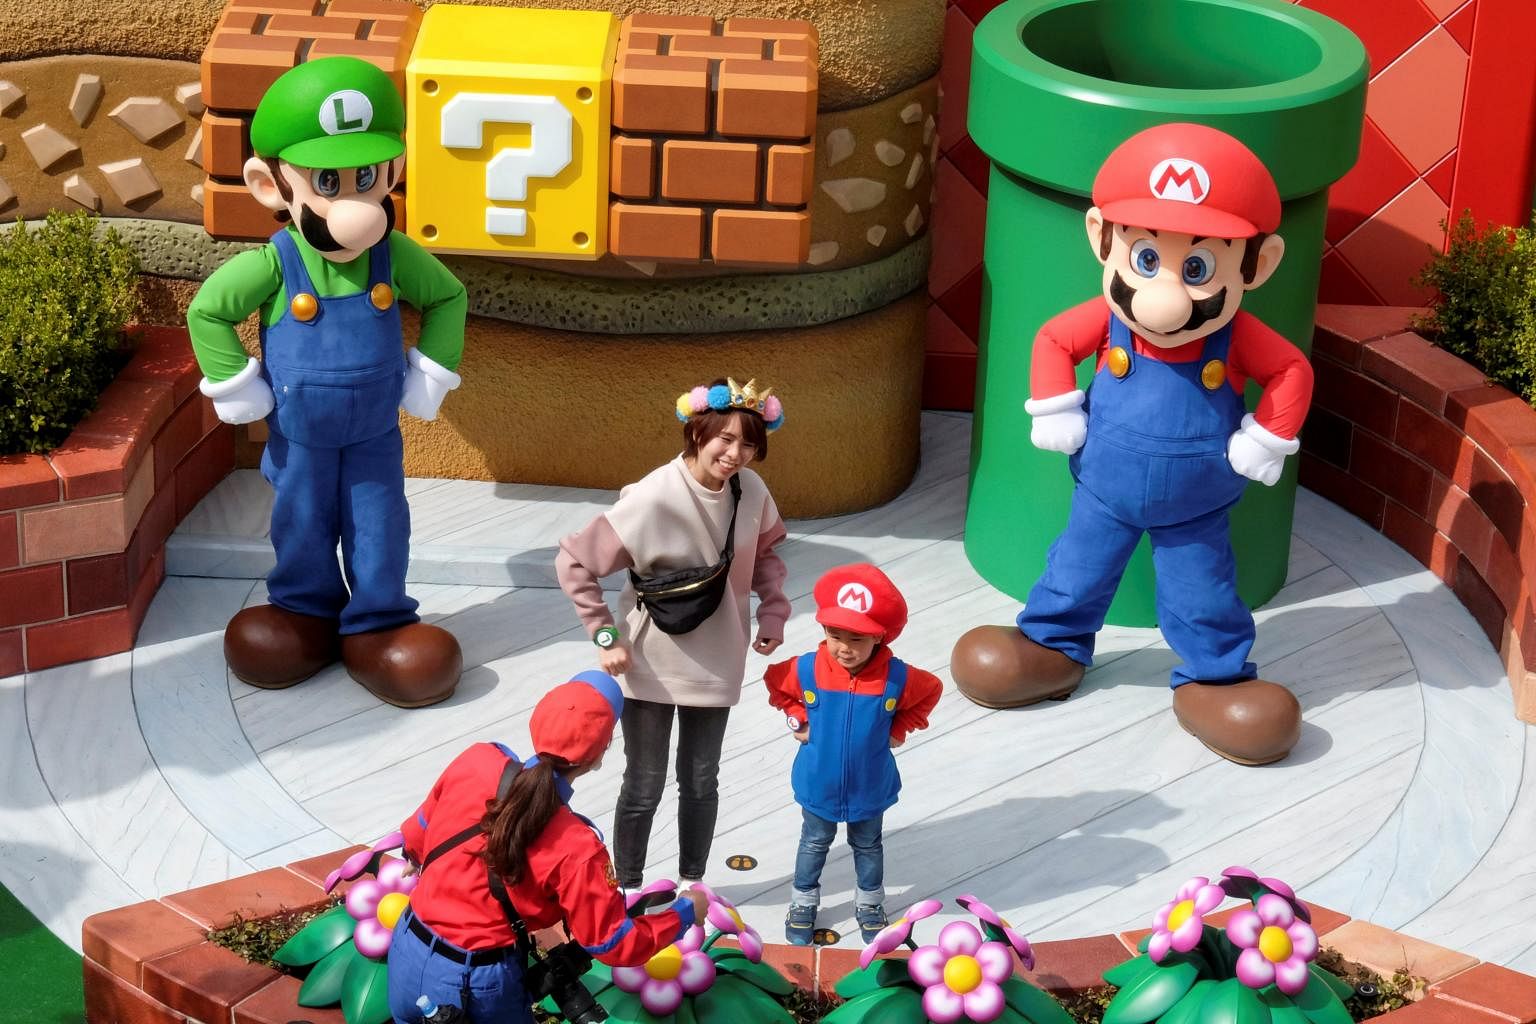 Long-awaited Super Mario theme park opens in Japan, East Asia News & Top  Stories - The Straits Times